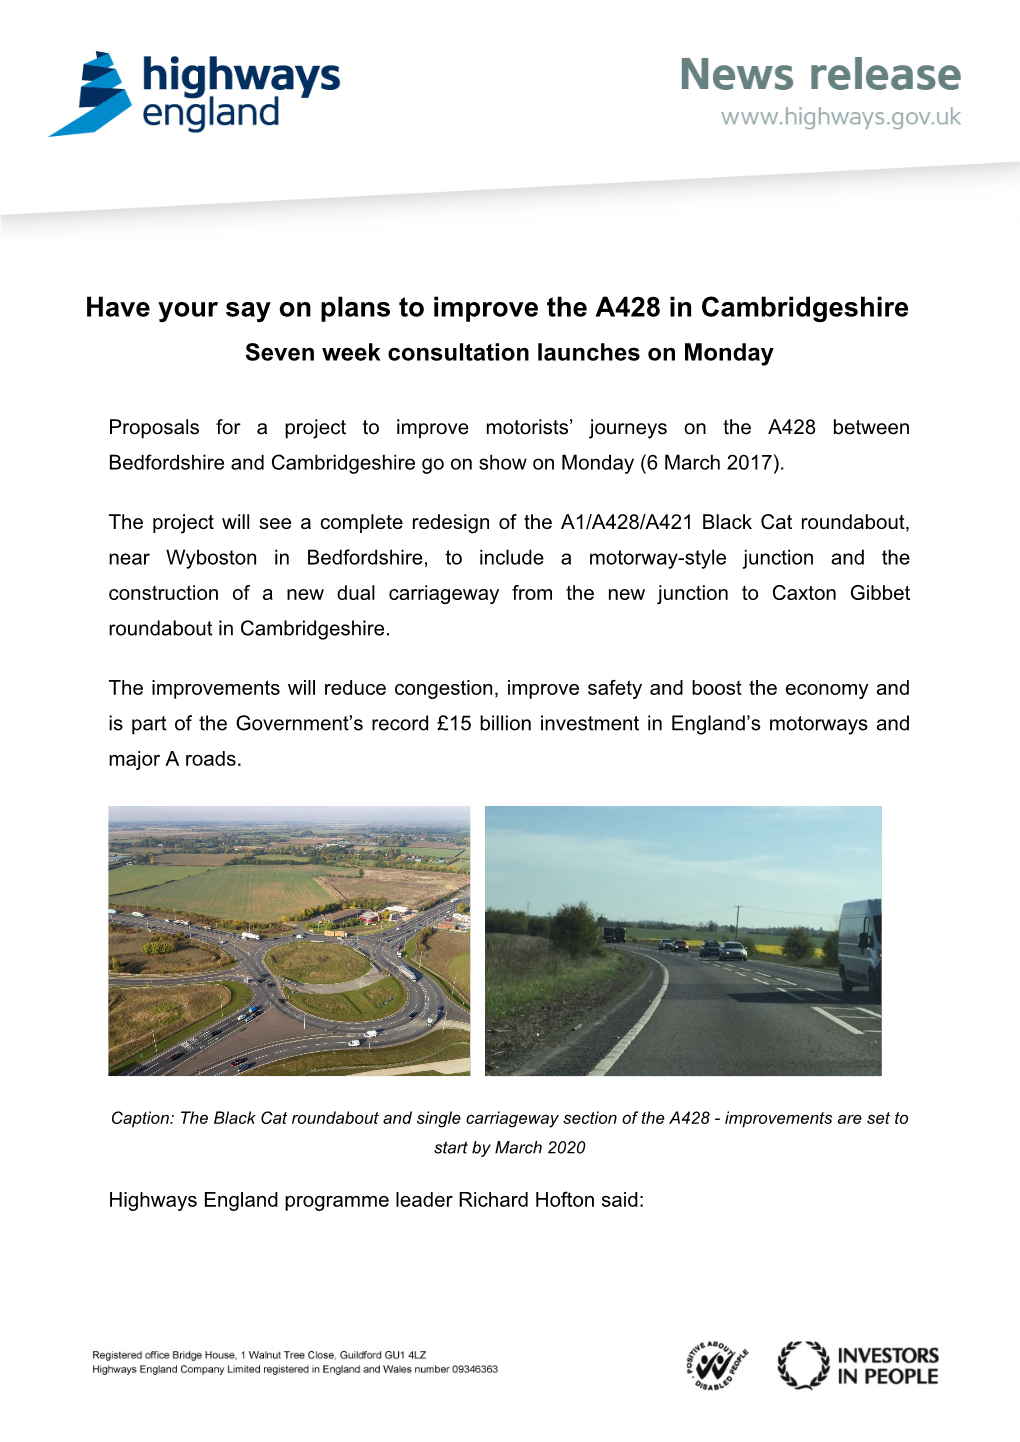 Have Your Say on Plans to Improve the A428 in Cambridgeshire Seven Week Consultation Launches on Monday